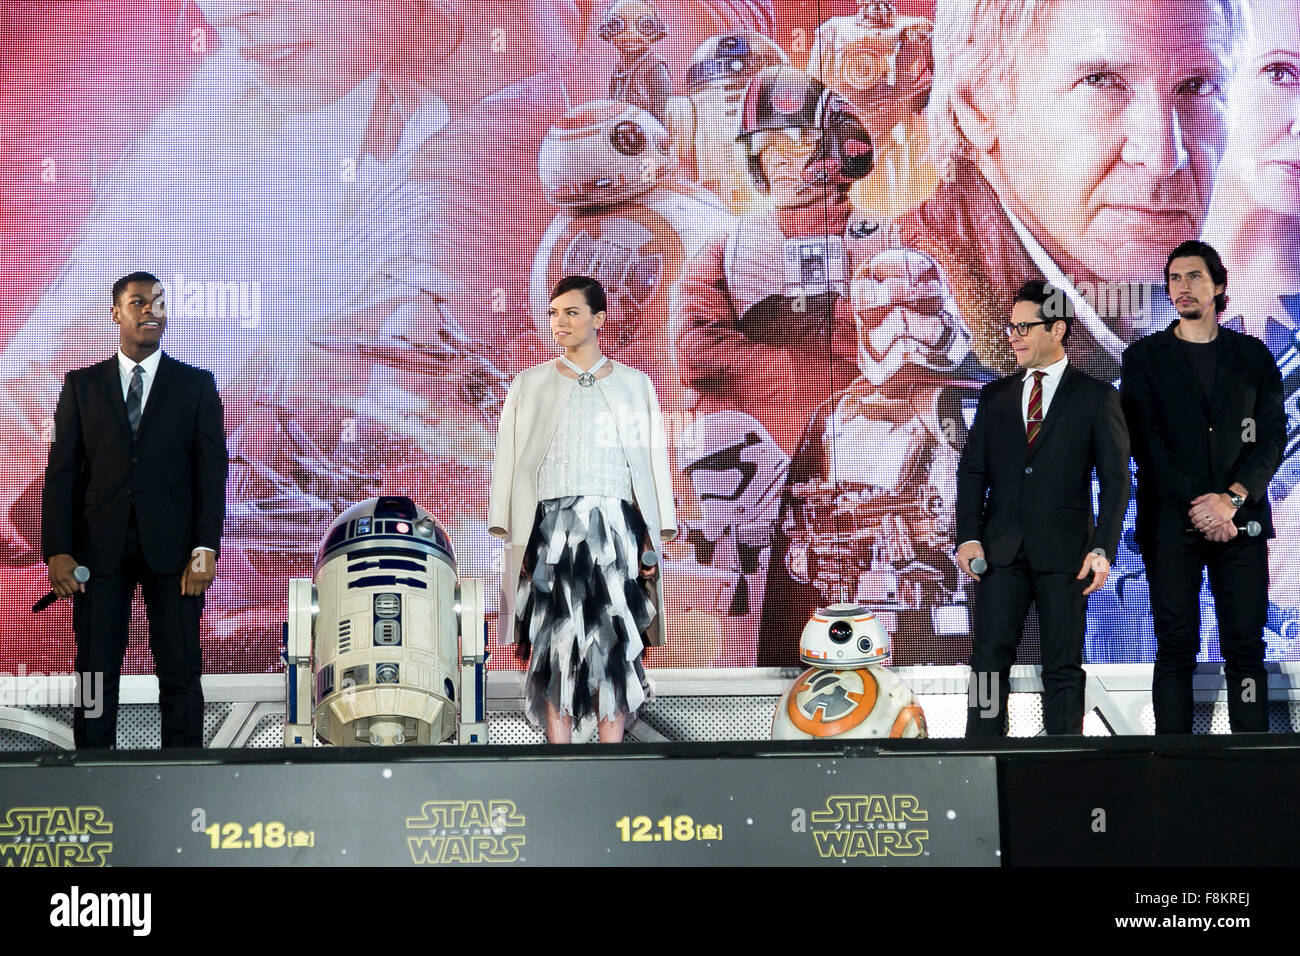 Tokyo, Japan. 10th December, 2015. (L to R) Actor John Boyega, droid R2-D2, actress Daisy Ridley, droid BB-8, director J.J. Abrams and actor Adam Driver attend the Japan Premiere for the movie ''Star Wars: The Force Awakens'' in Roppongi Hills on December 10, 2015, Tokyo, Japan. The cast are spending 2 days in Japan as part of the promotion for the new movie which is set for worldwide release on December 18th. Credit:  Aflo Co. Ltd./Alamy Live News Stock Photo